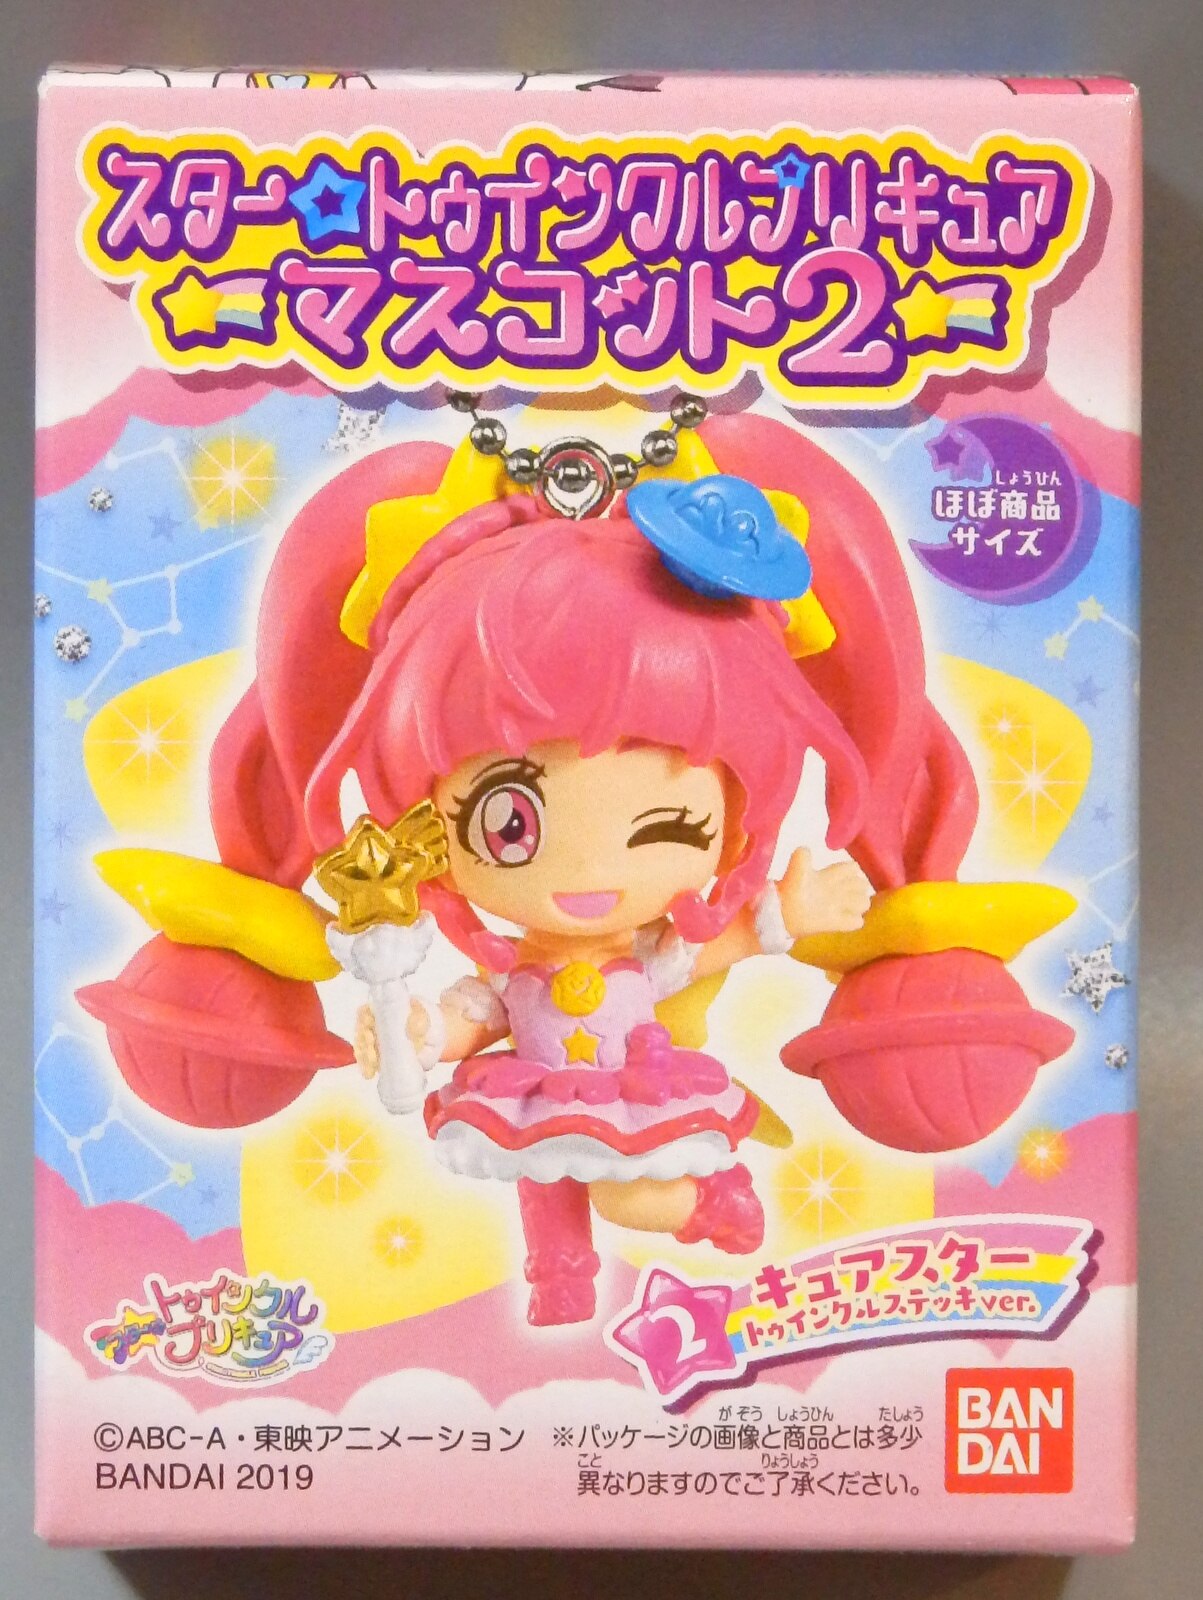 Star Twinkle Precure Stick Bandai Anime Japan 2019 for sale online 